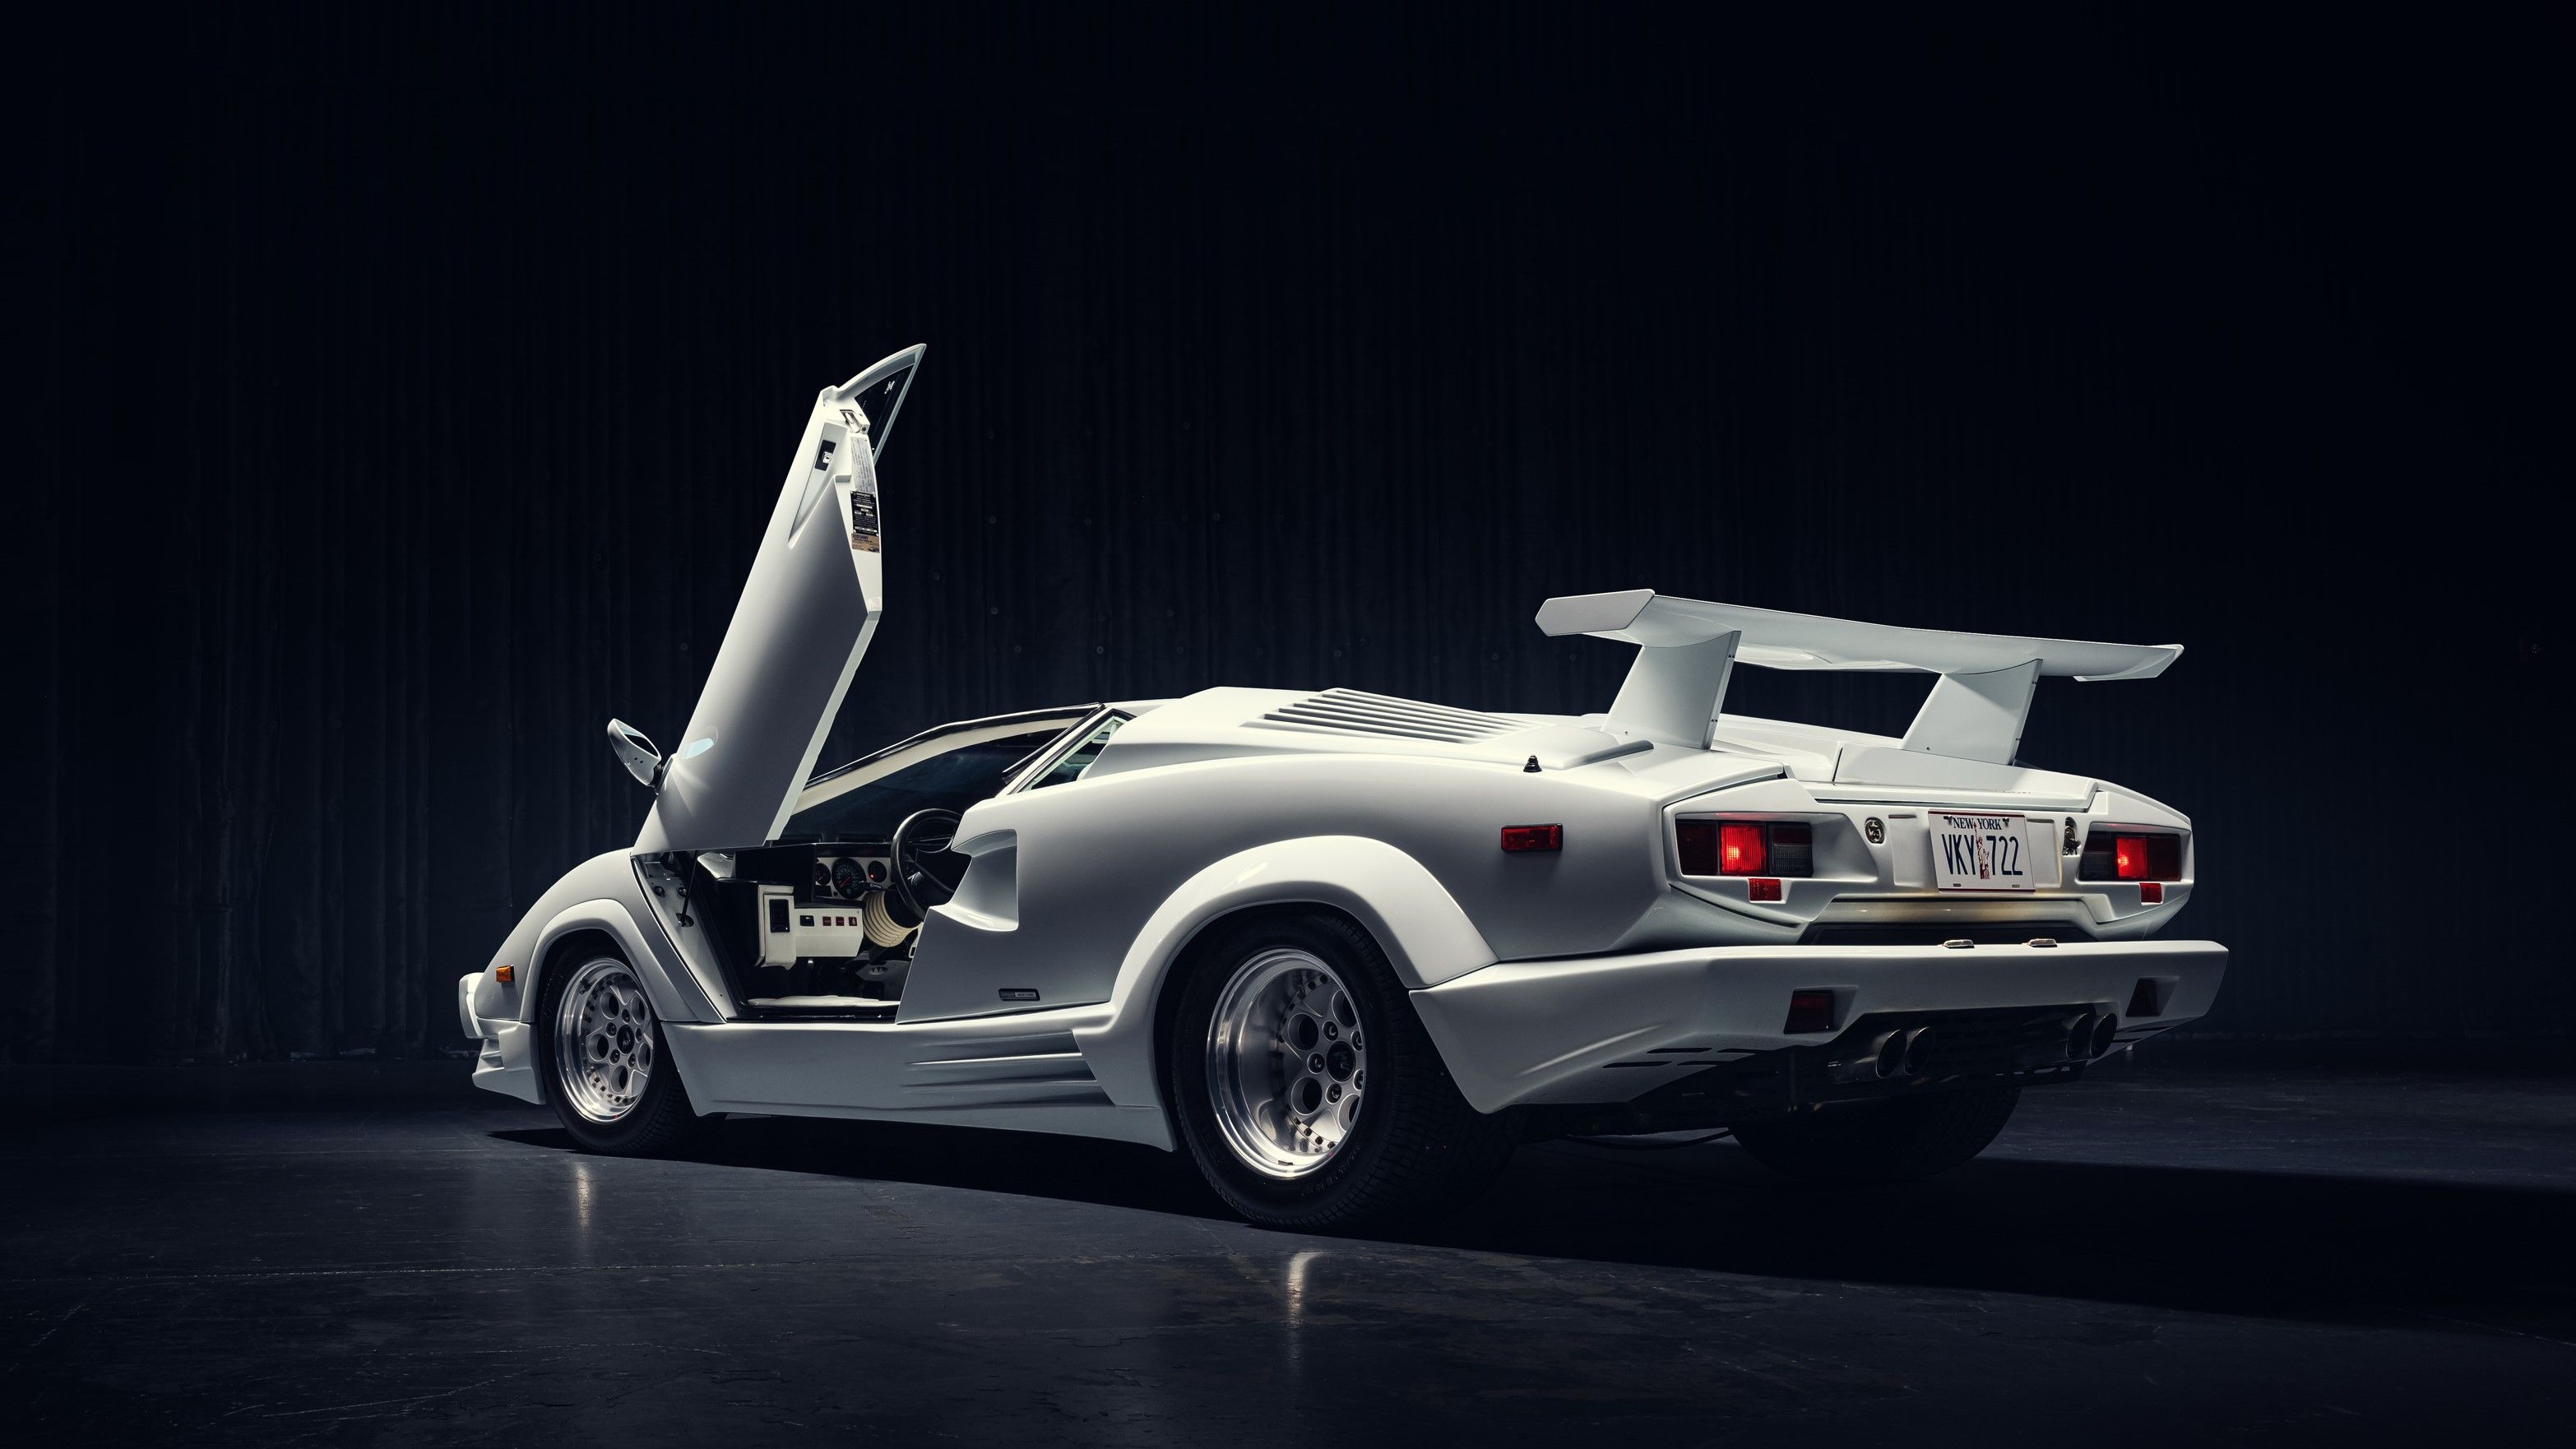 General 3132x1762 Lamborghini Countach Countach 25th Anniversary white cars photography car rear view vehicle simple background licence plates italian cars Volkswagen Group